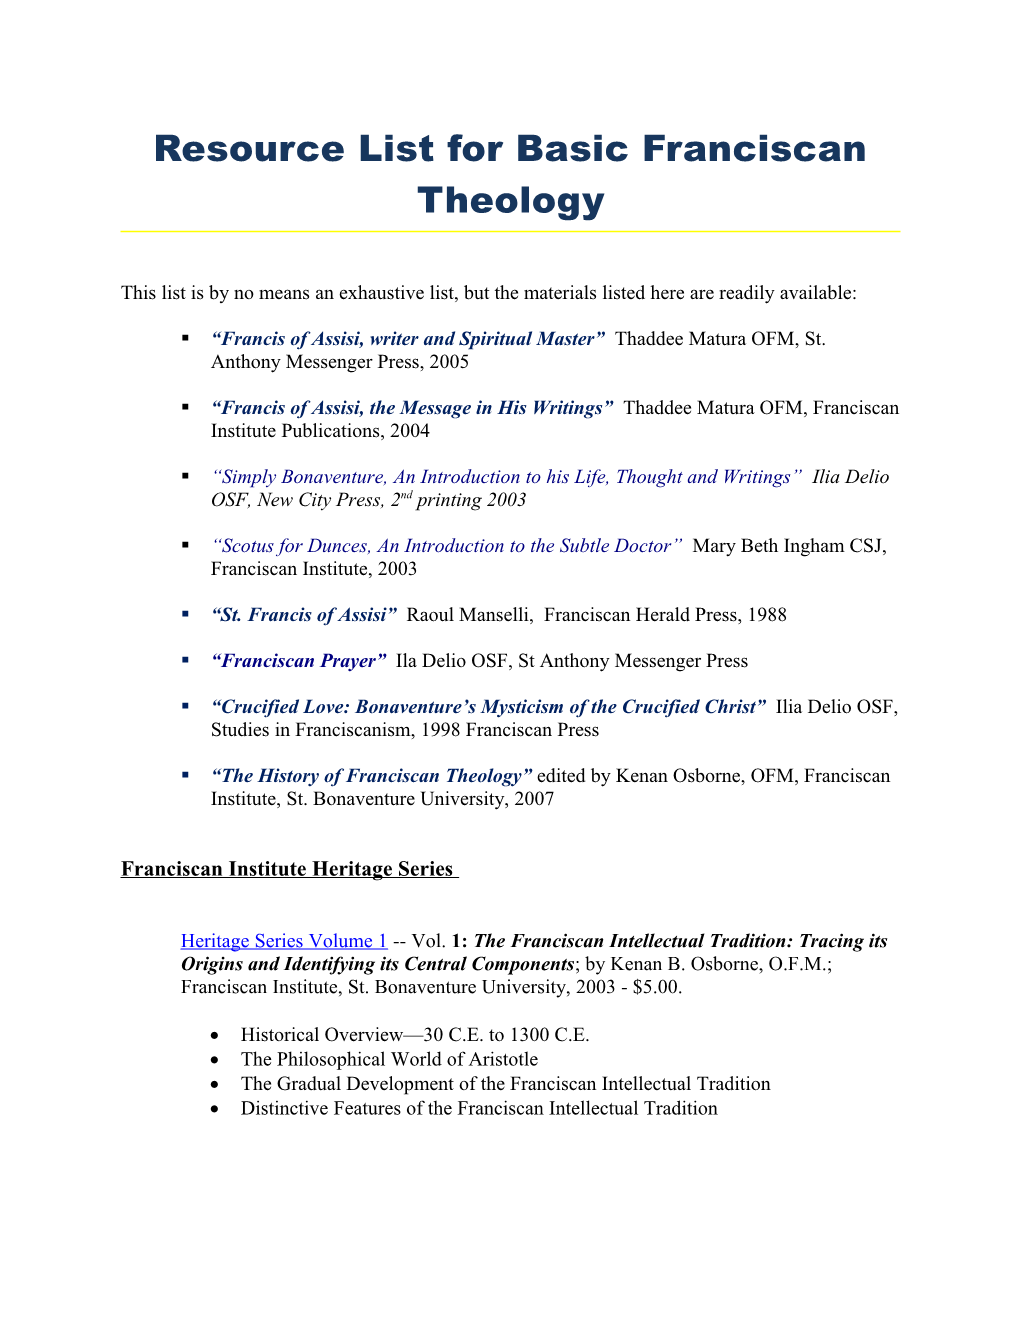 Resource List for Basic Franciscan Theology